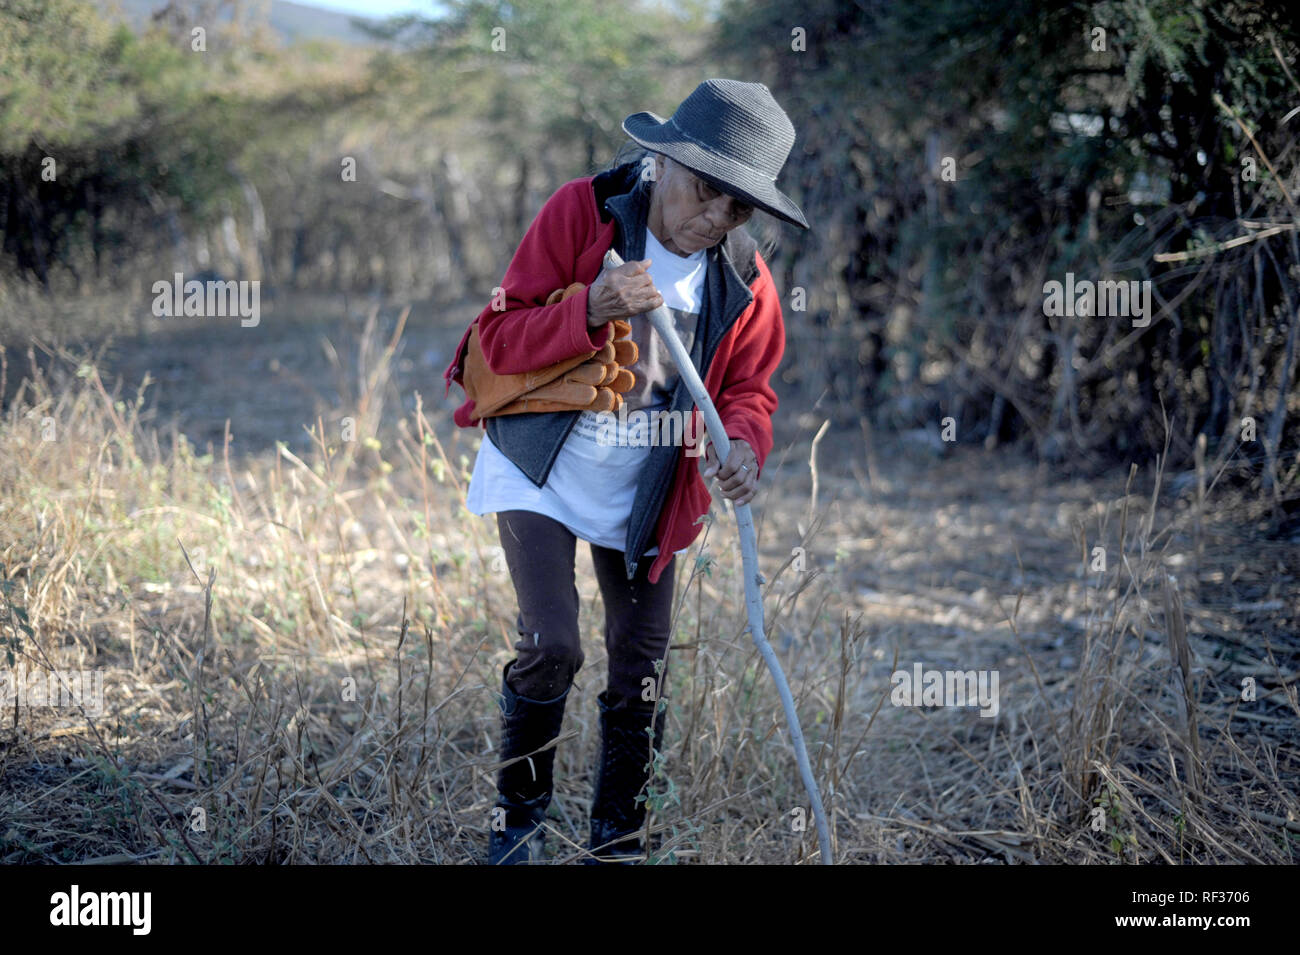 23 January 2019, Mexico, Huitzuco: Participants of the 4th National Search Brigade are searching for hidden graves. More than 40,000 people are considered missing in Mexico. A group of relatives tries on their own to find hidden graves and thus perhaps to make the mourning possible for some families. (to dpa "The Search for Certainty - Hidden Tombs in Mexico" of 24.01.2019) Photo: Jesus Alvarado/dpa Stock Photo